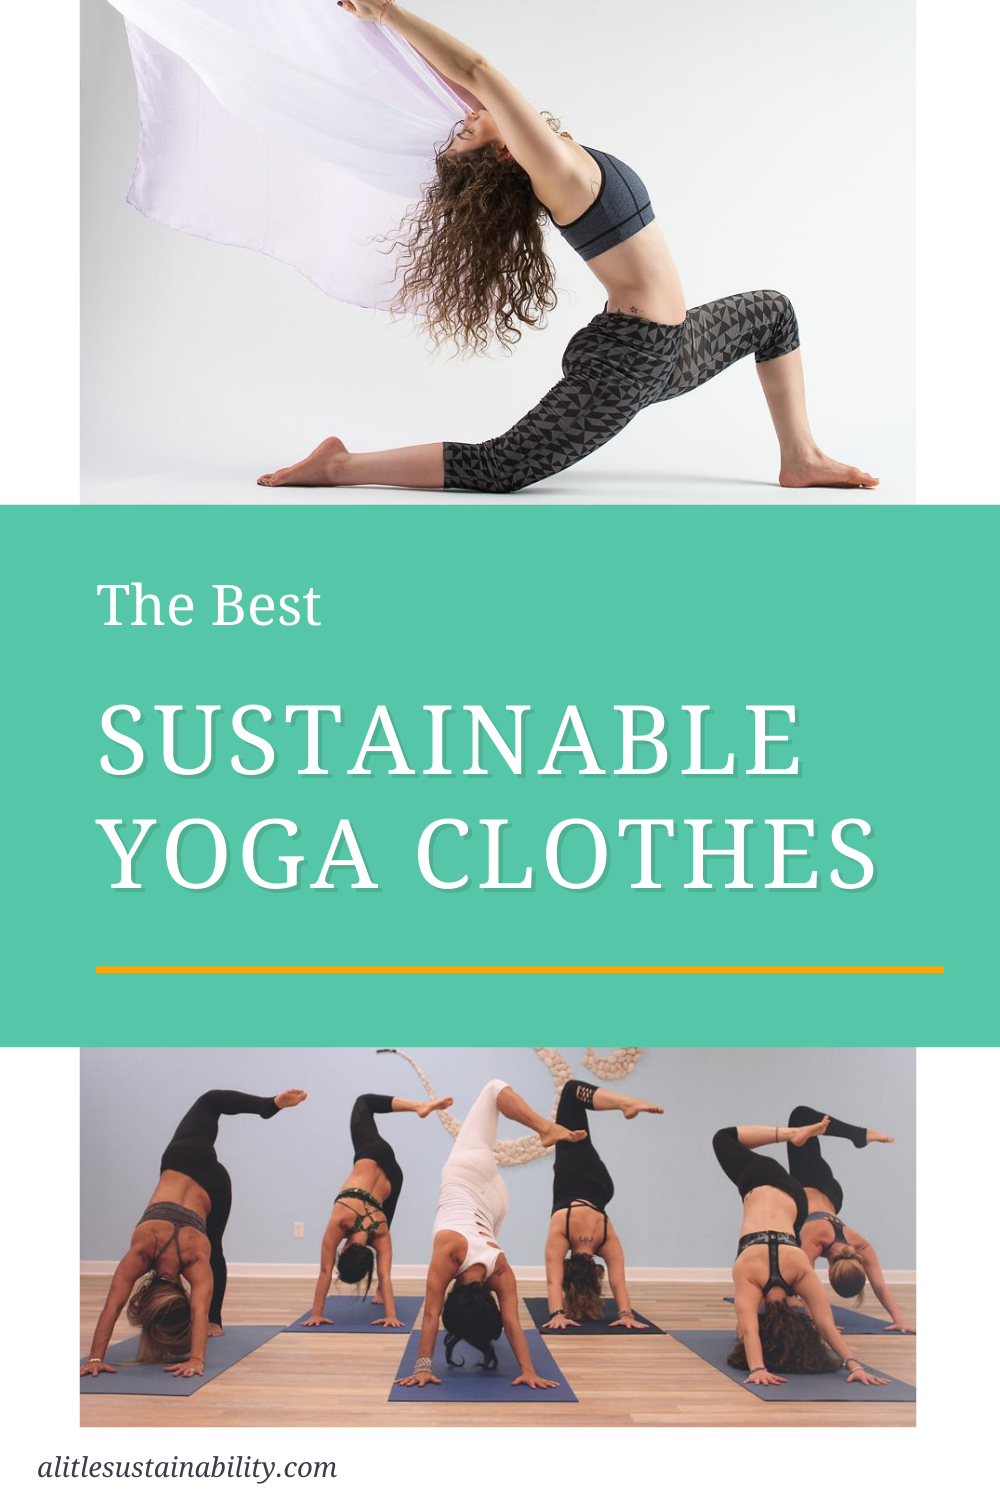 Eco-friendly yoga clothes, including sustainable yoga pants, low waste sports bras, and non-toxic leggings. Find more sustainability blogs at alittlesustainability.com